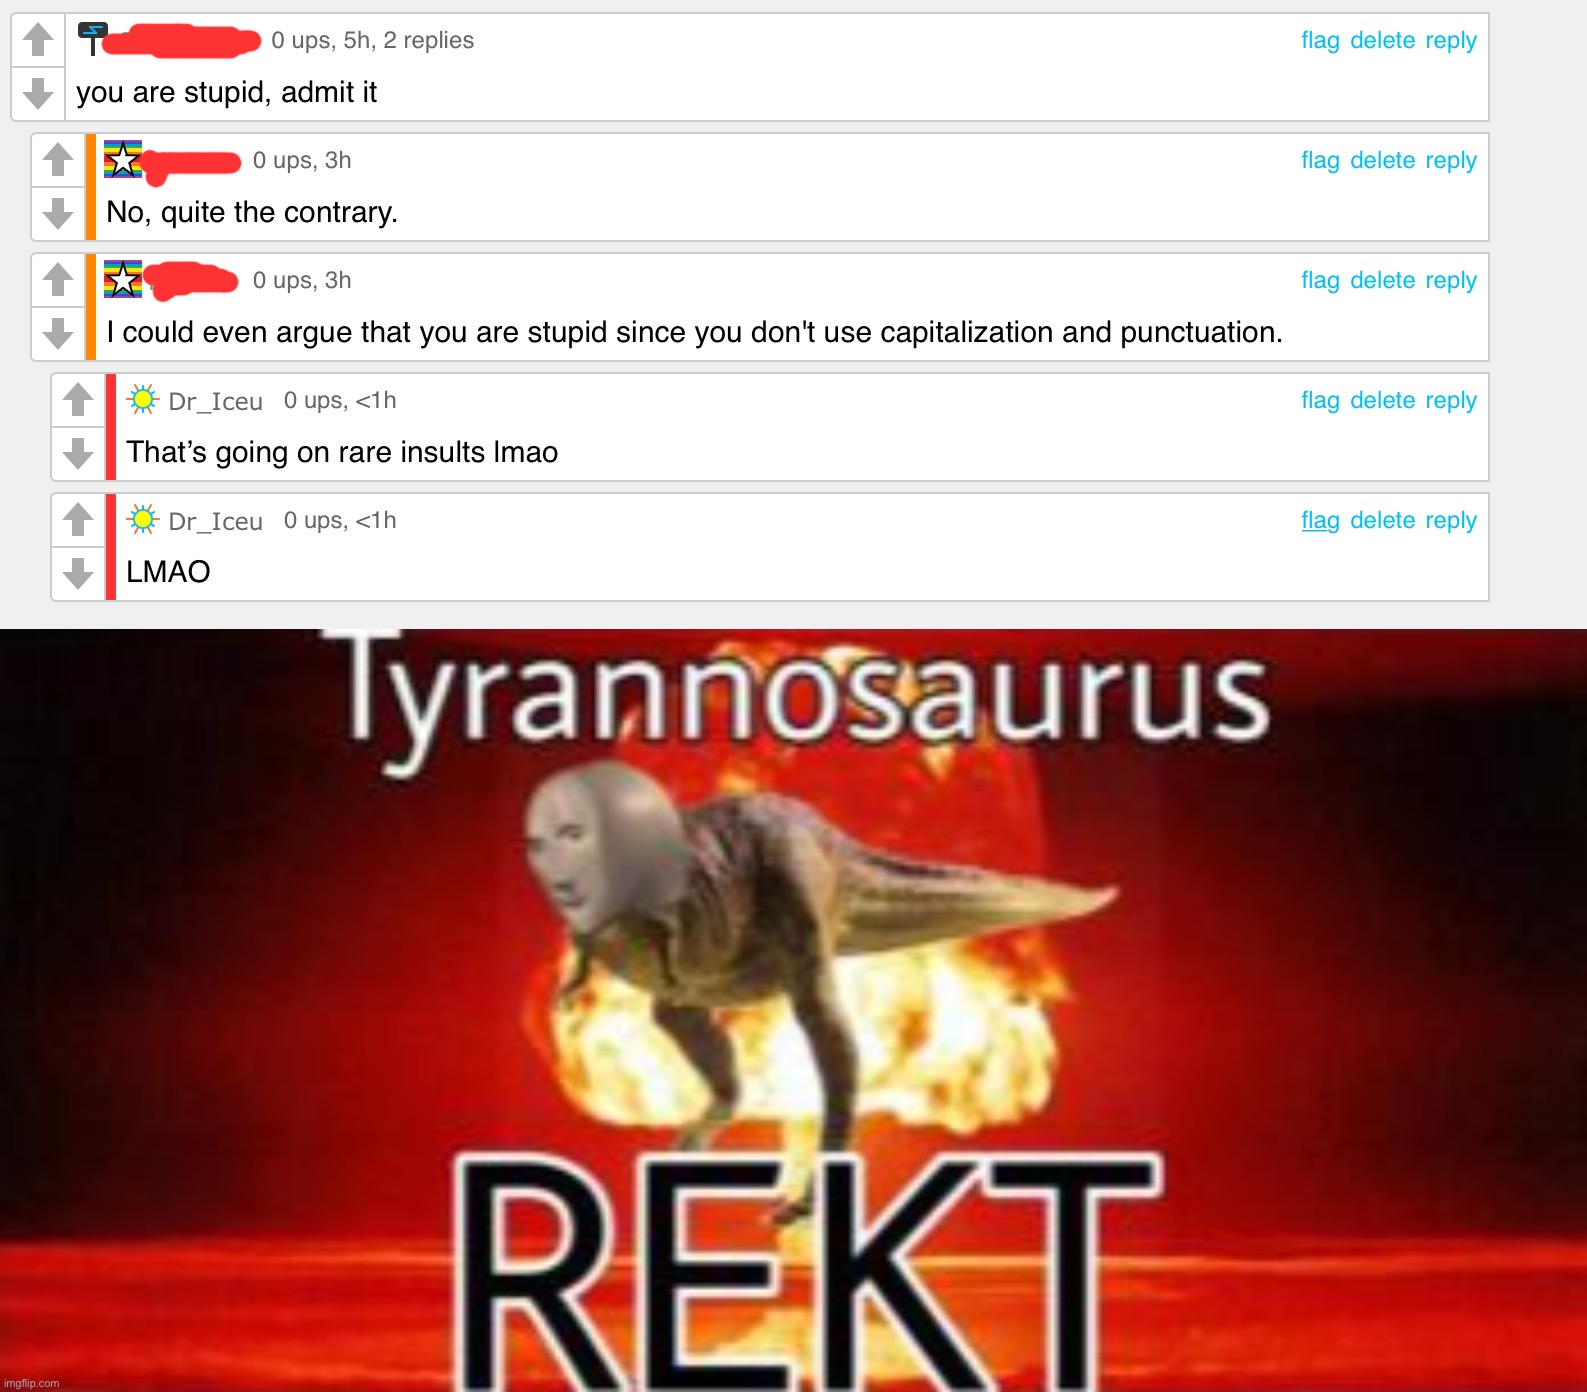 No, YOU’RE STUPID | image tagged in tyrannosaurus rekt,memes,funny,oof,lol,rareinsults | made w/ Imgflip meme maker